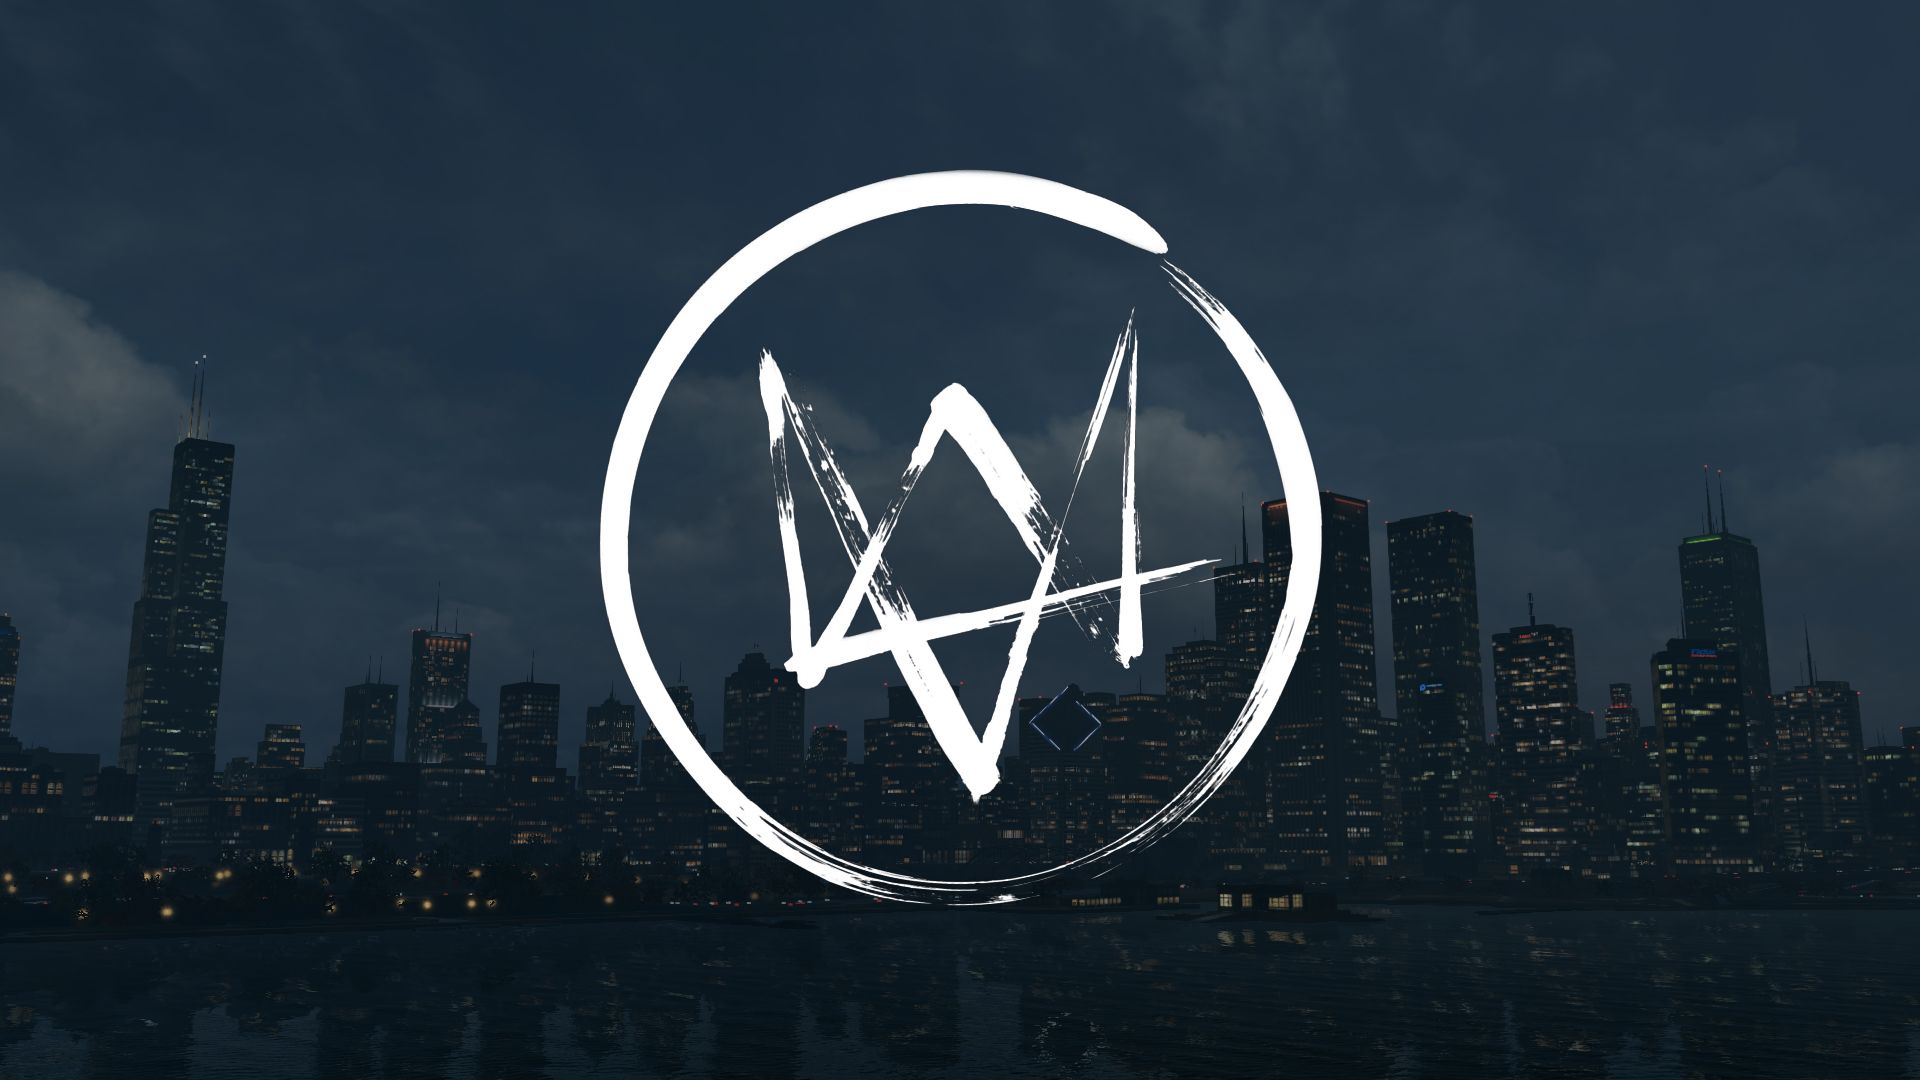 watch dogs, video game